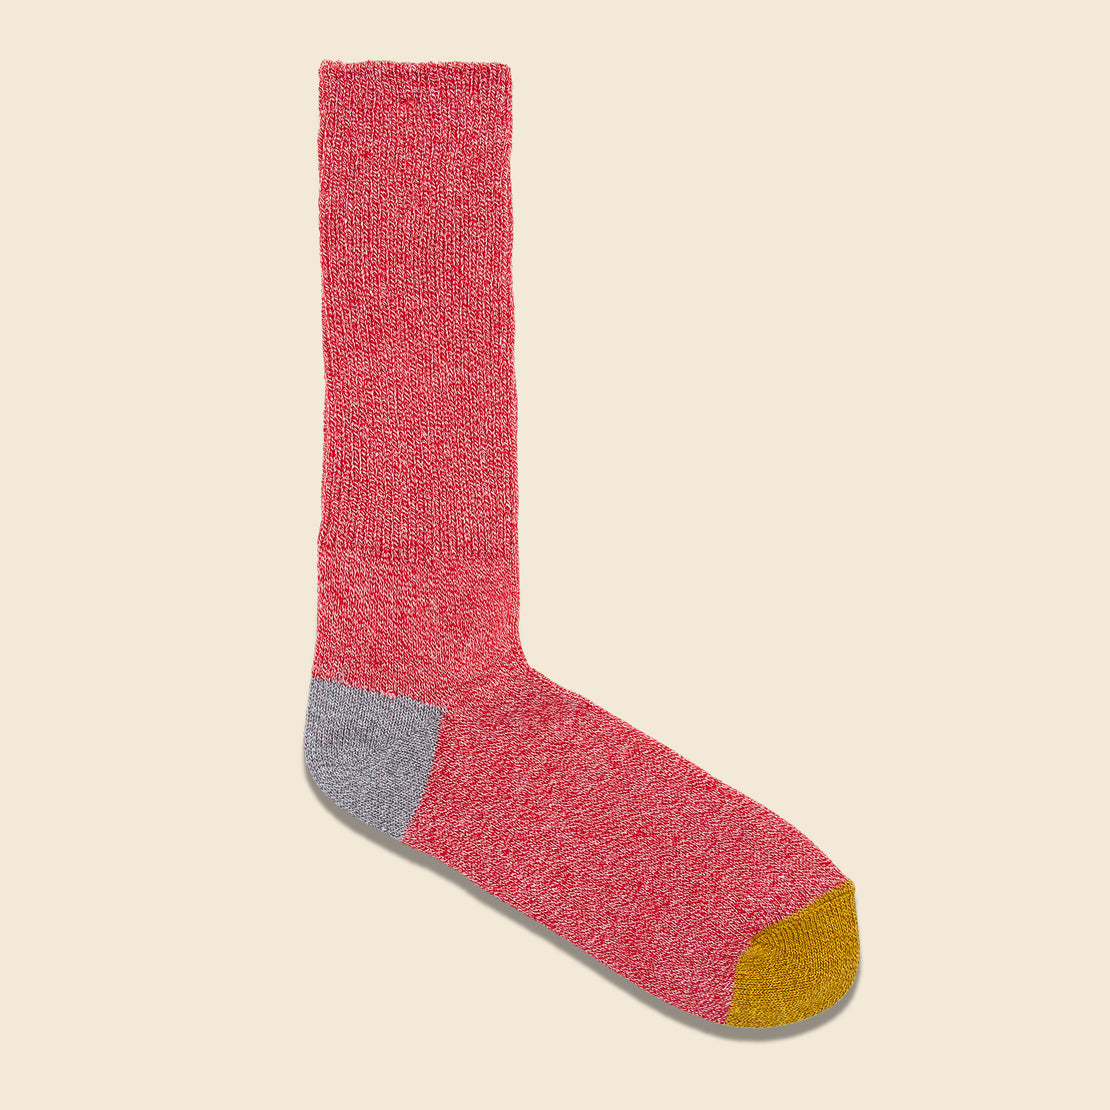 Anonymous Ism 2-Point Heel/Toe Crew Sock - Pink/Grey/Gold